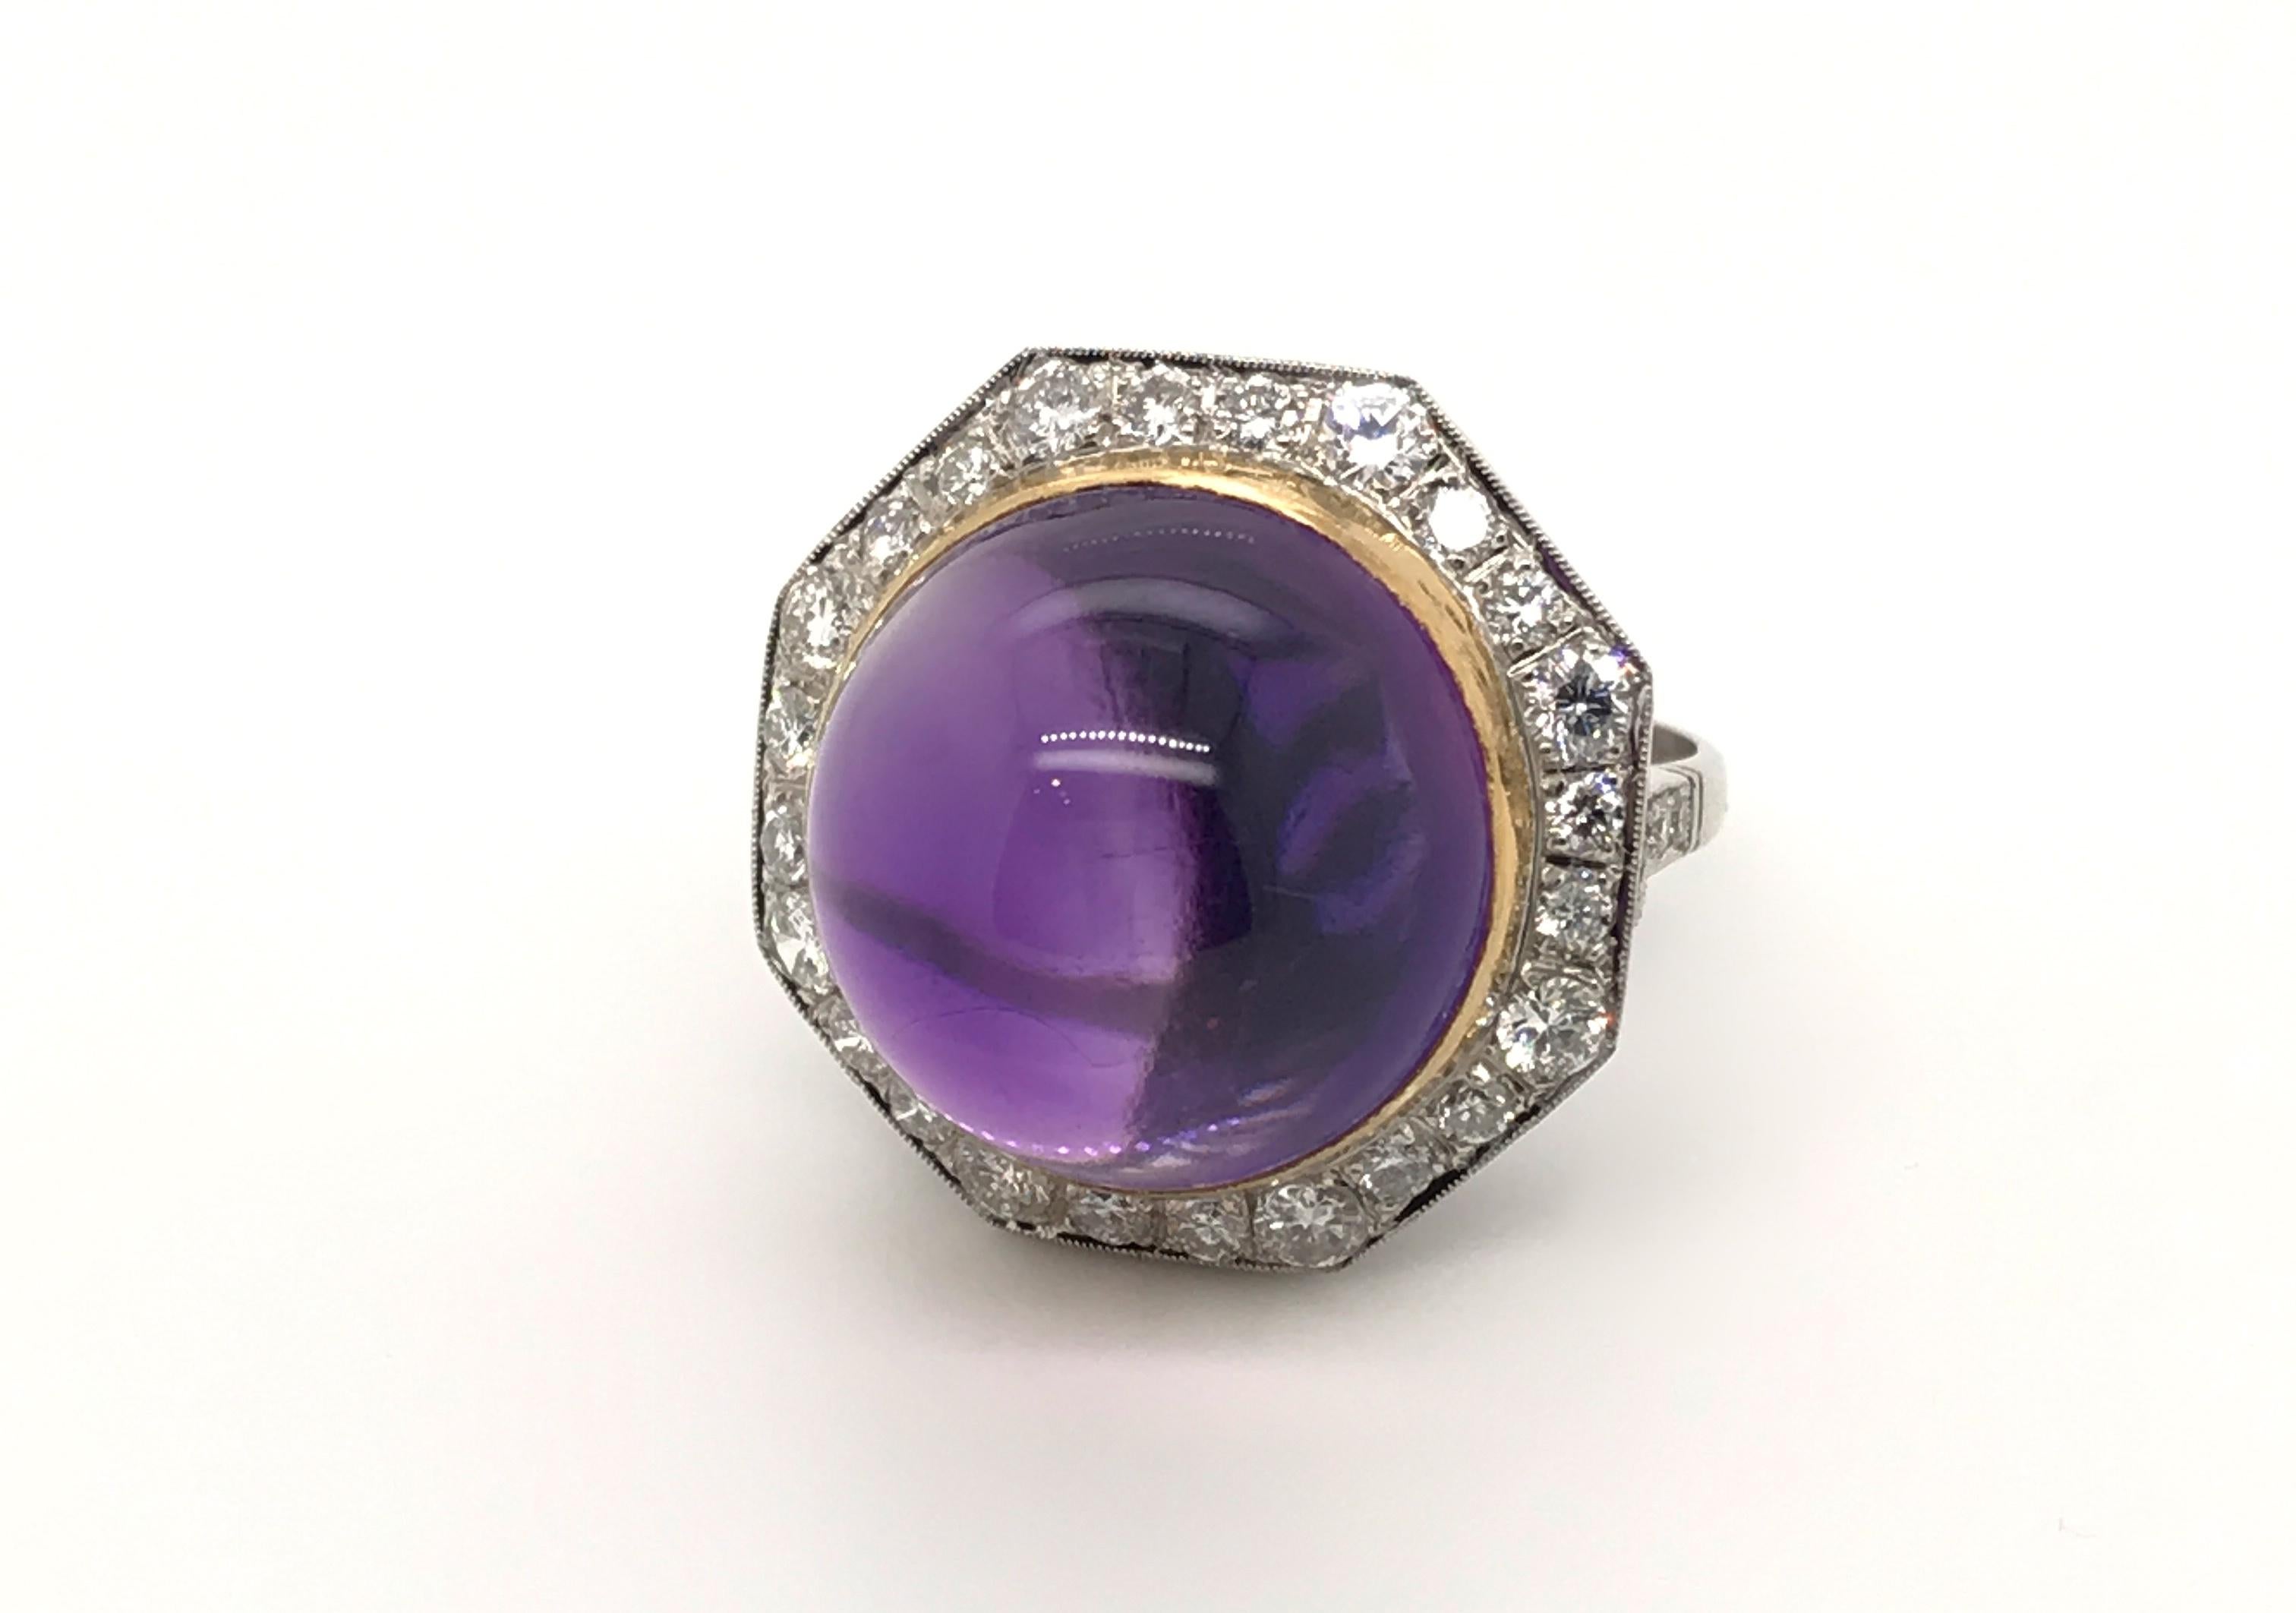 The showstopper of all rings! I would have to say this is one of the largest cocktail rings have ever had in my collection, so if you are looking for a BIG eye-catching ring with an amazing colourful gemstone, this could be it! A cabochon cut deep